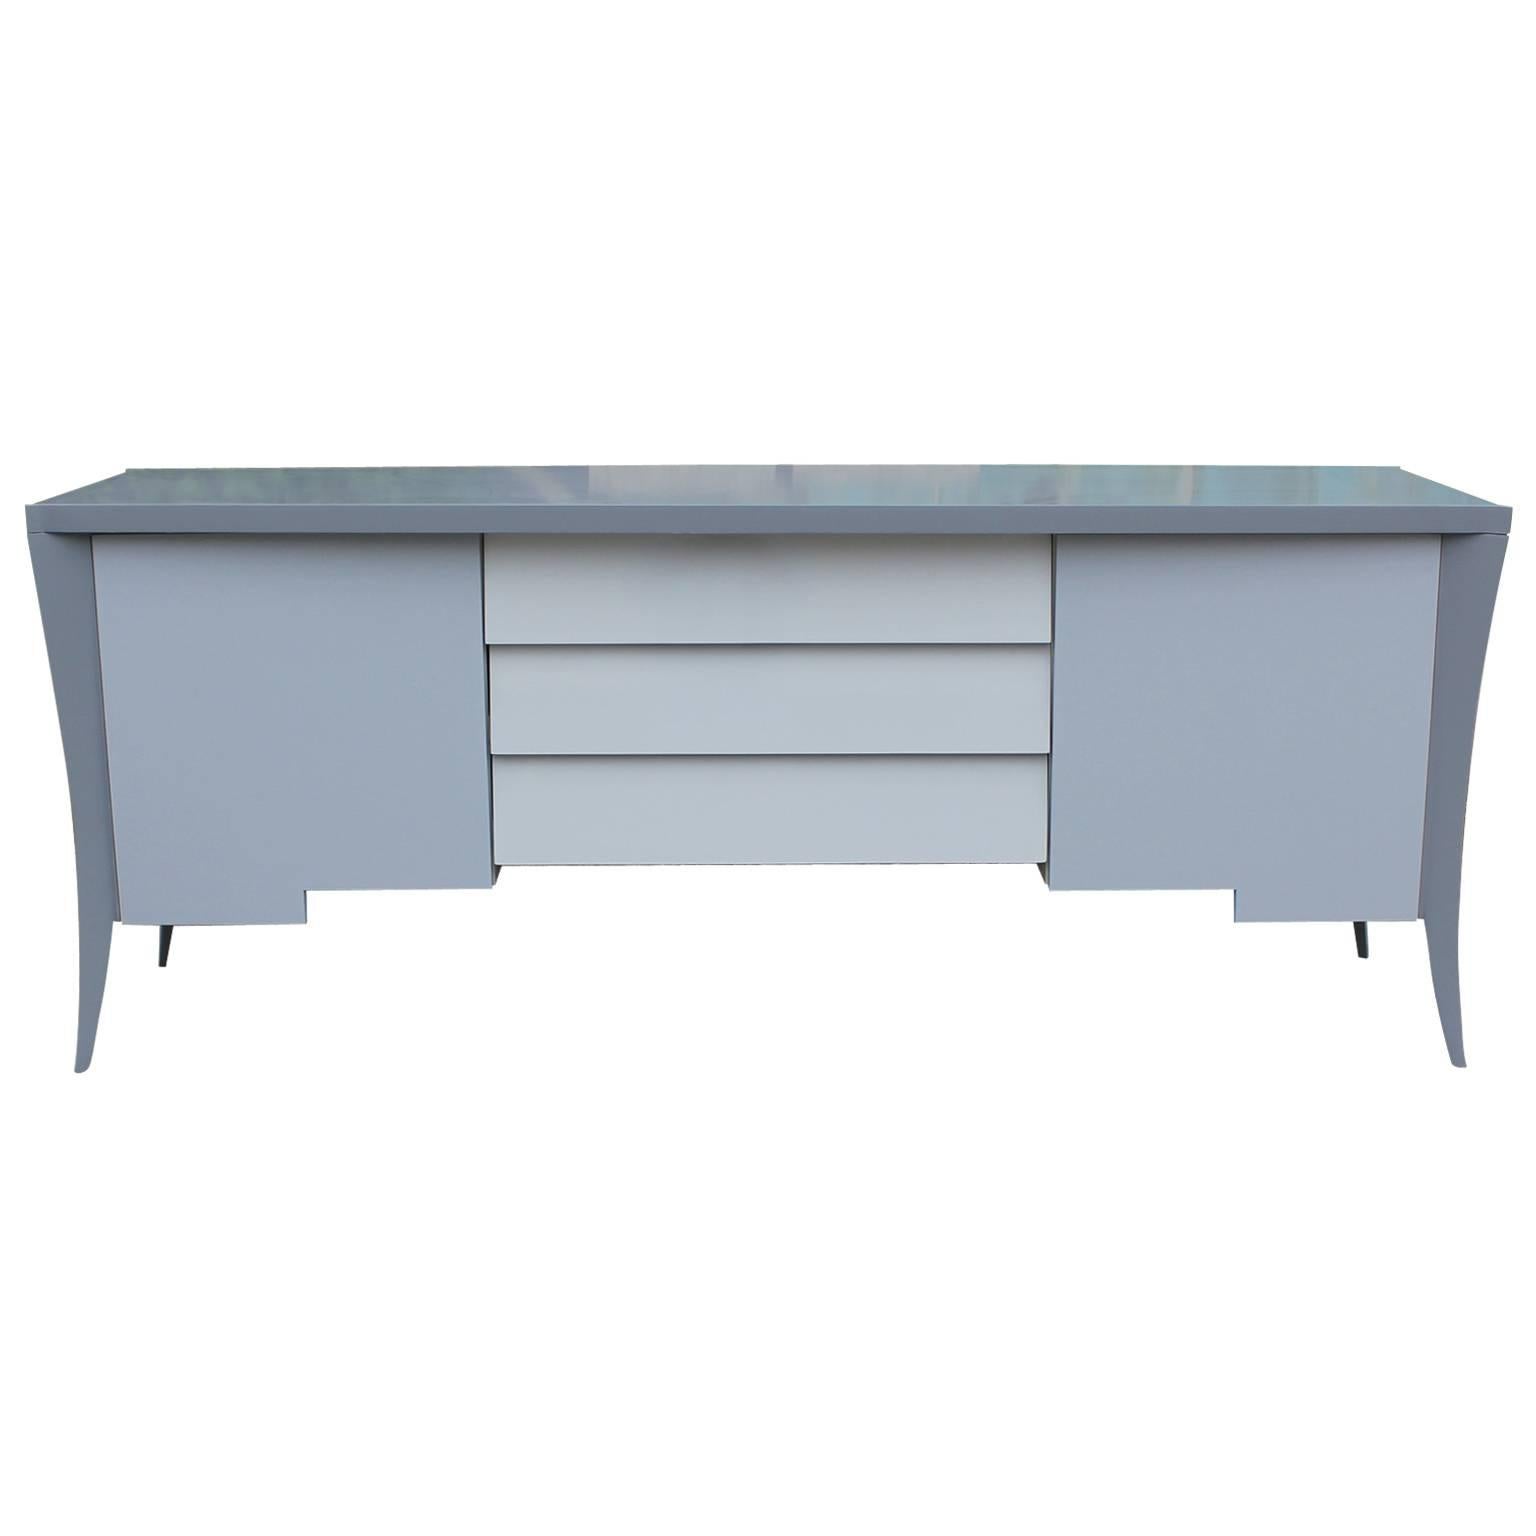 Grey Tone Sculptural Lacquered Post Modern Sideboard